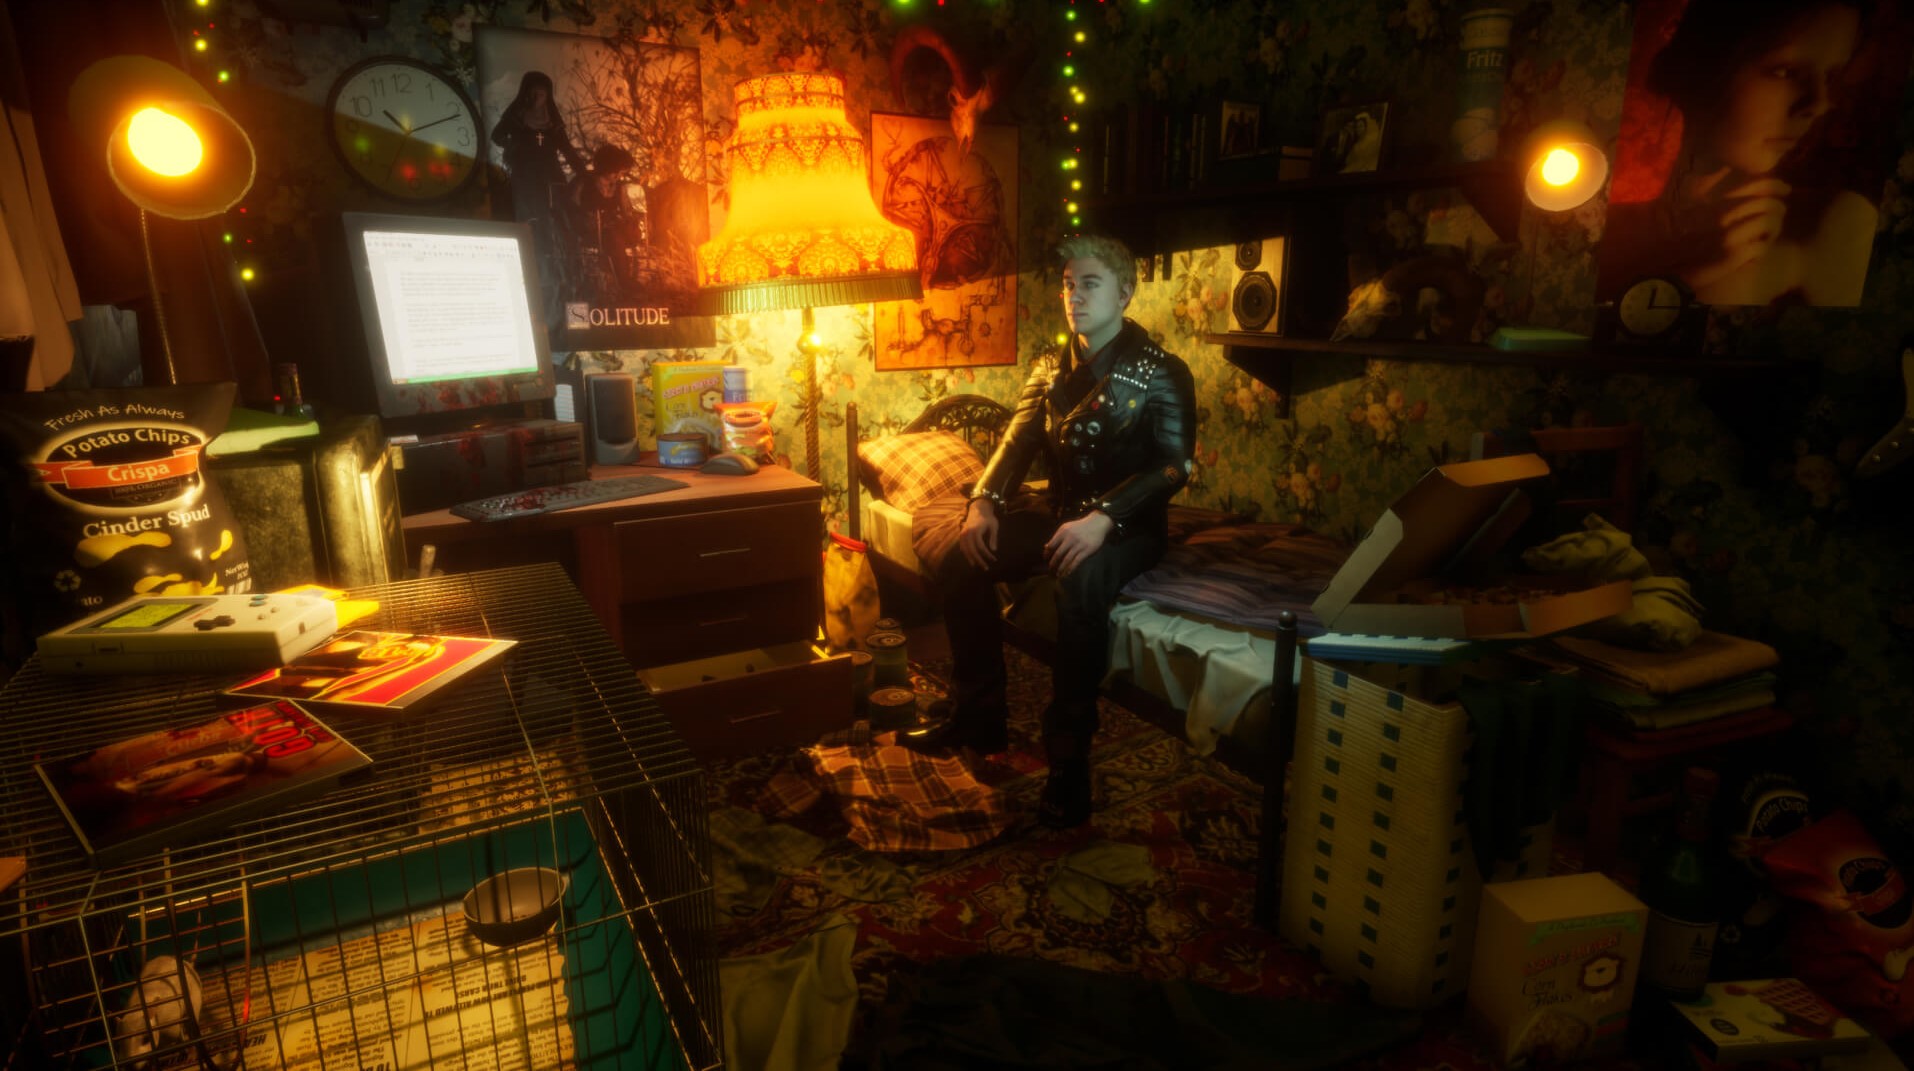 A young punk in his 20s wearing a leather jacket sits on a bed, on the wall are posters of half naked women, beside the bed a desktop computer, and above it a small overloaded shelf covered in books.  To the left of the room there is a wire cage on topa chest of drawers.  Inside the cage a rat runs on a wheel.  Next to the cage is a small safe.